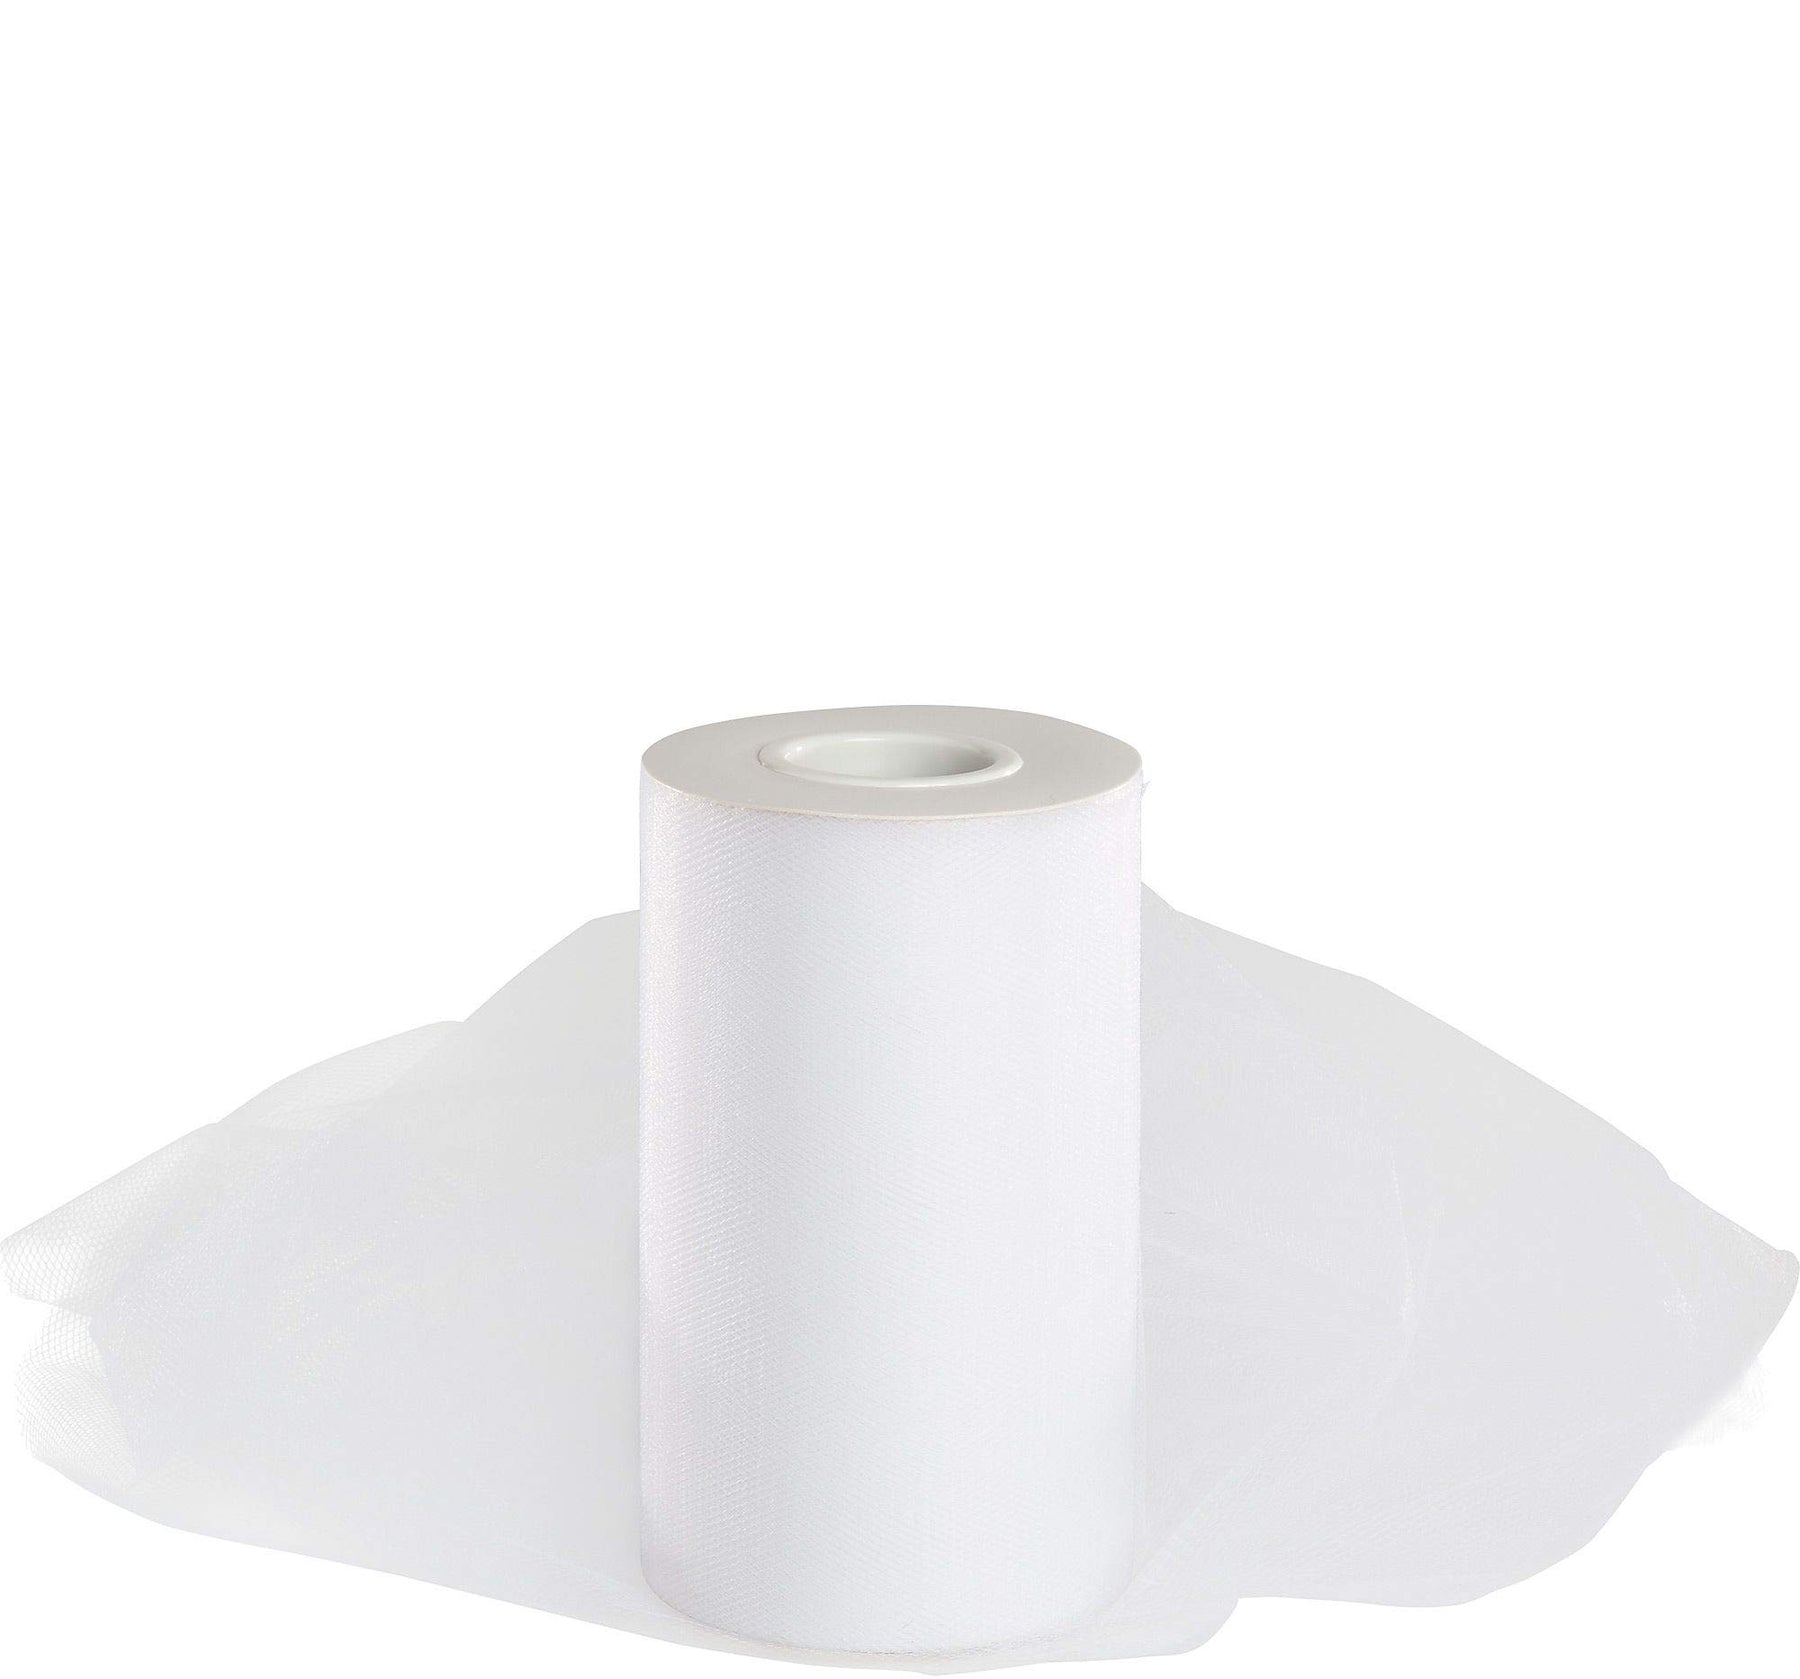 Elegant White Tulle Spool - 6" x 65 Yards, 1 Piece - Perfect Decoration for Weddings, Engagements, and Anniversaries